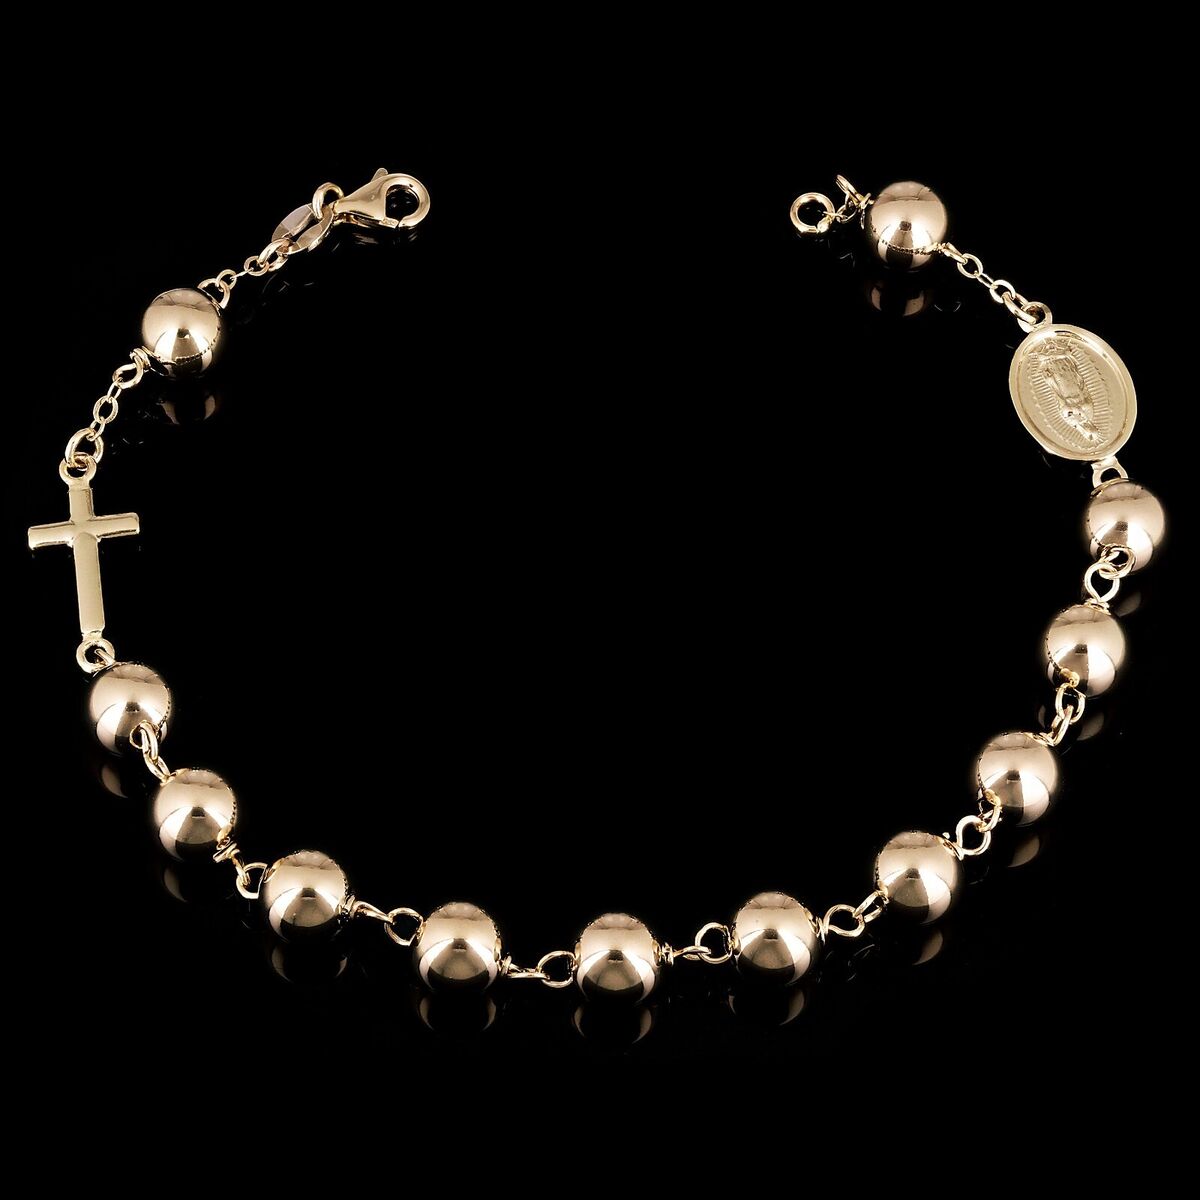 Yellow rose gold rosary bracelet☆ russiangold.com ☆ Gold 585 333 Low price